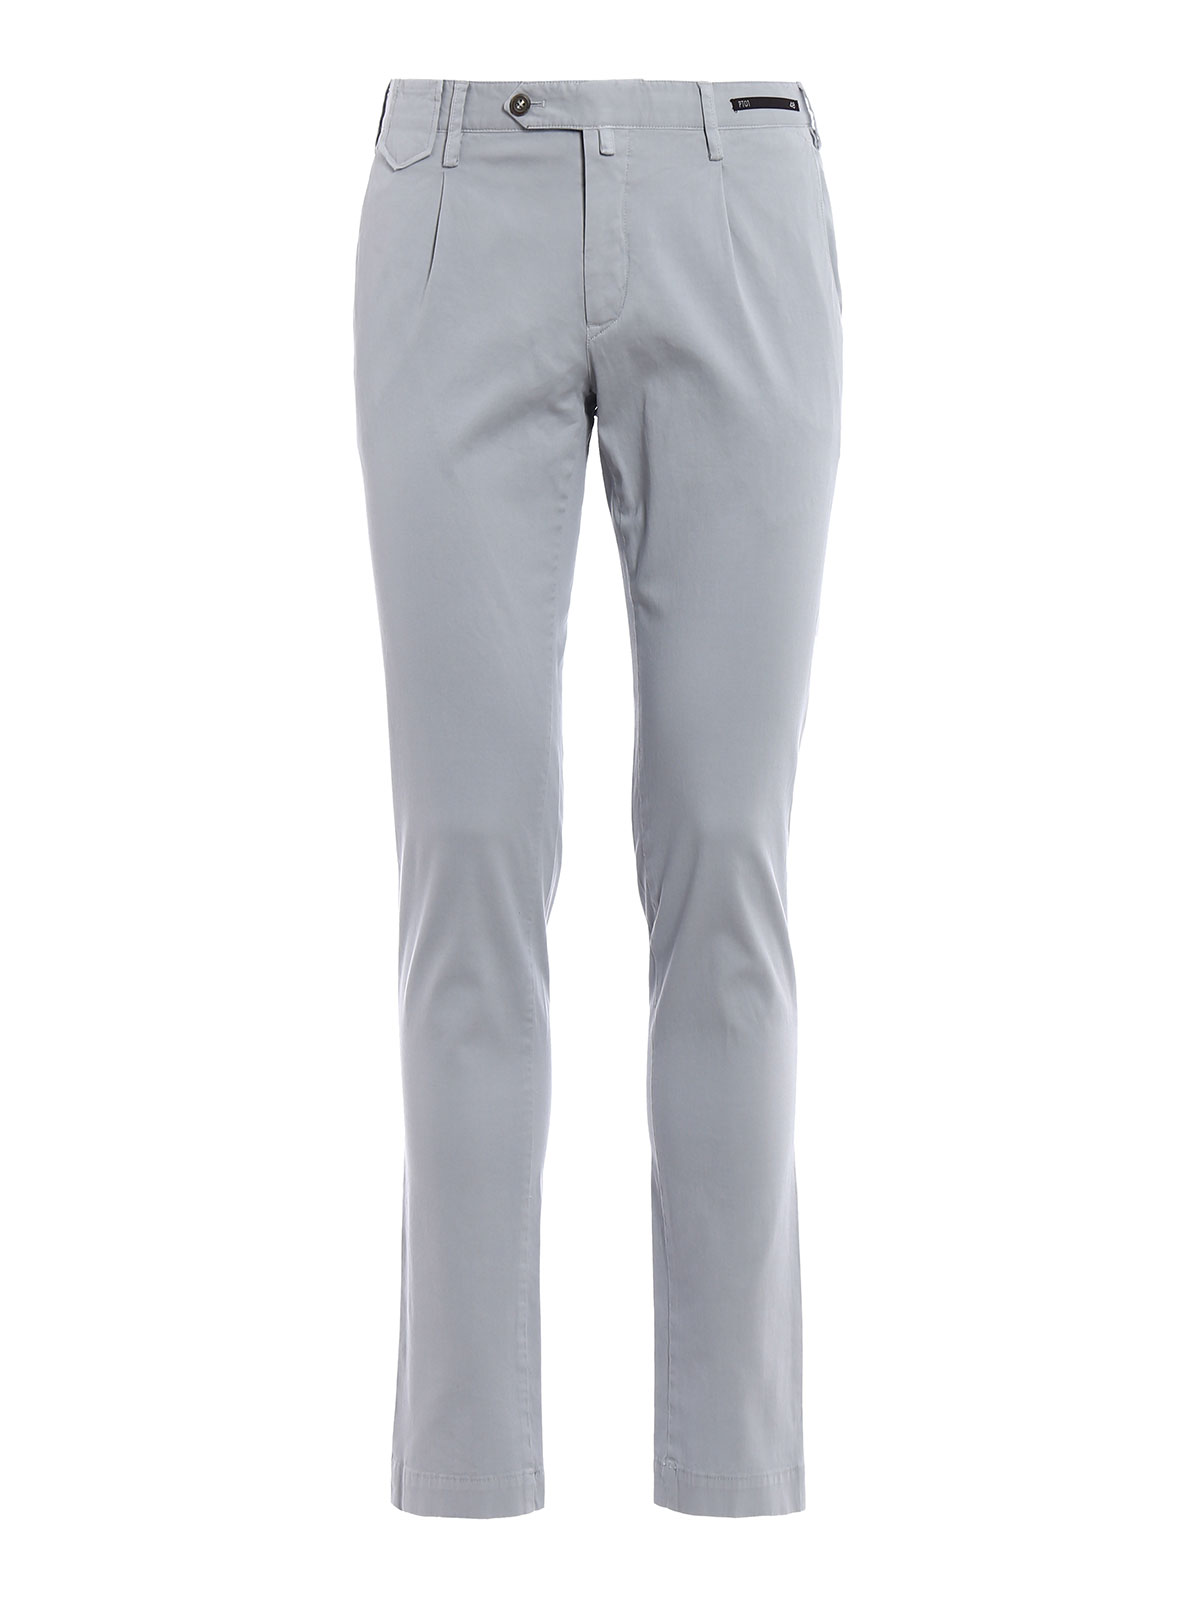 Tailored & Formal trousers Pt Torino - Super Slim Fit light grey chinos ...